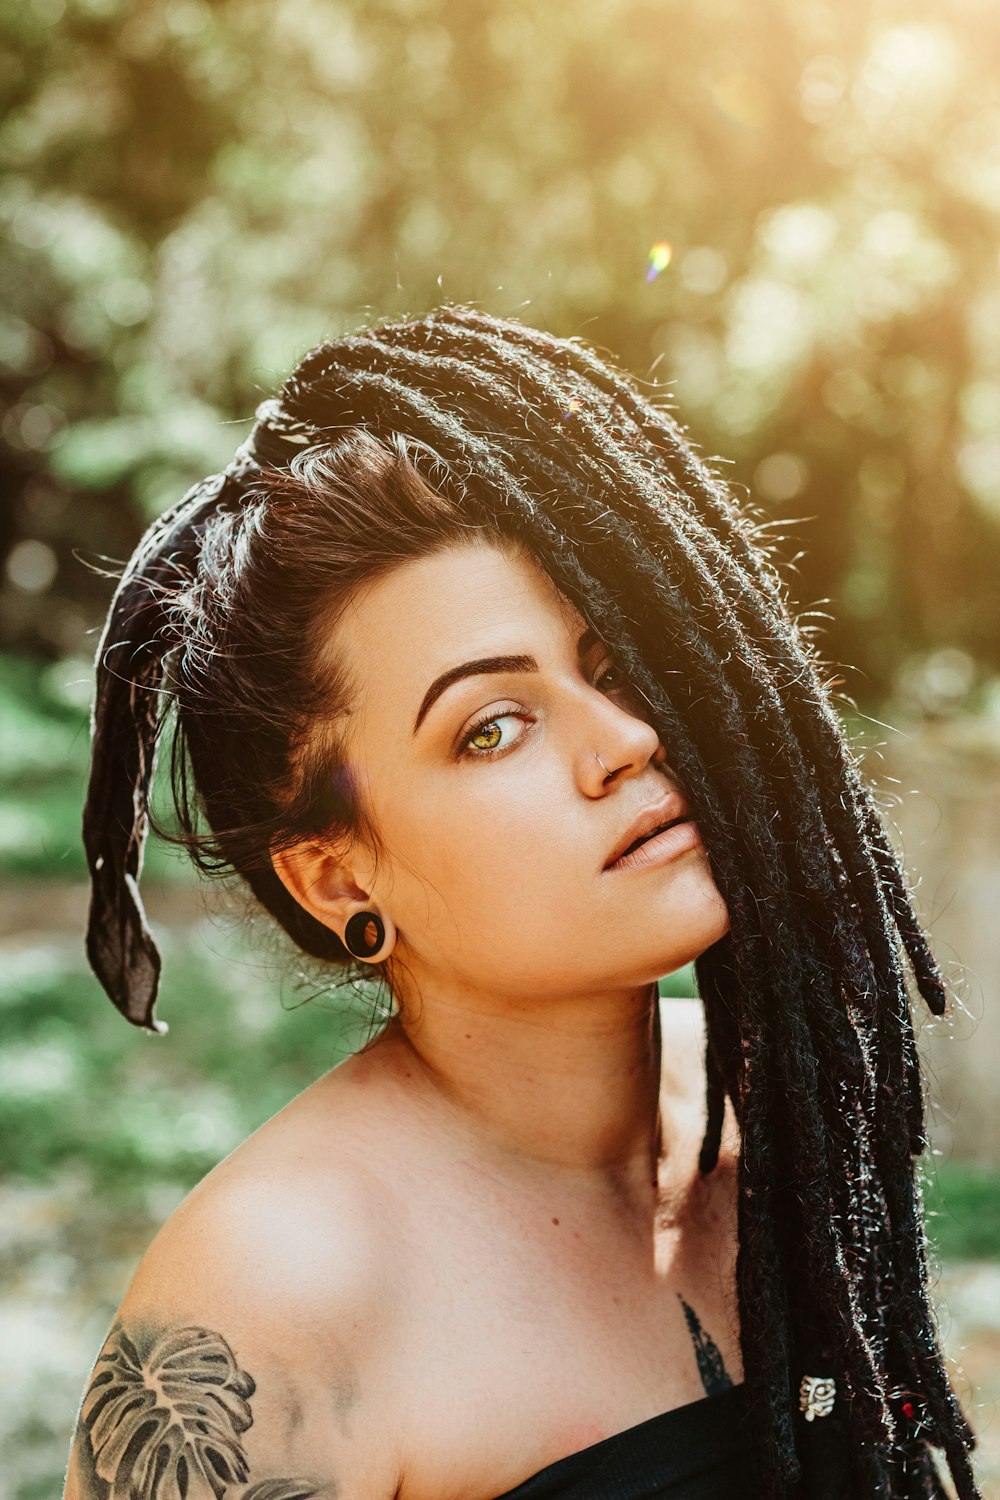 a woman with dreadlocks and a black top